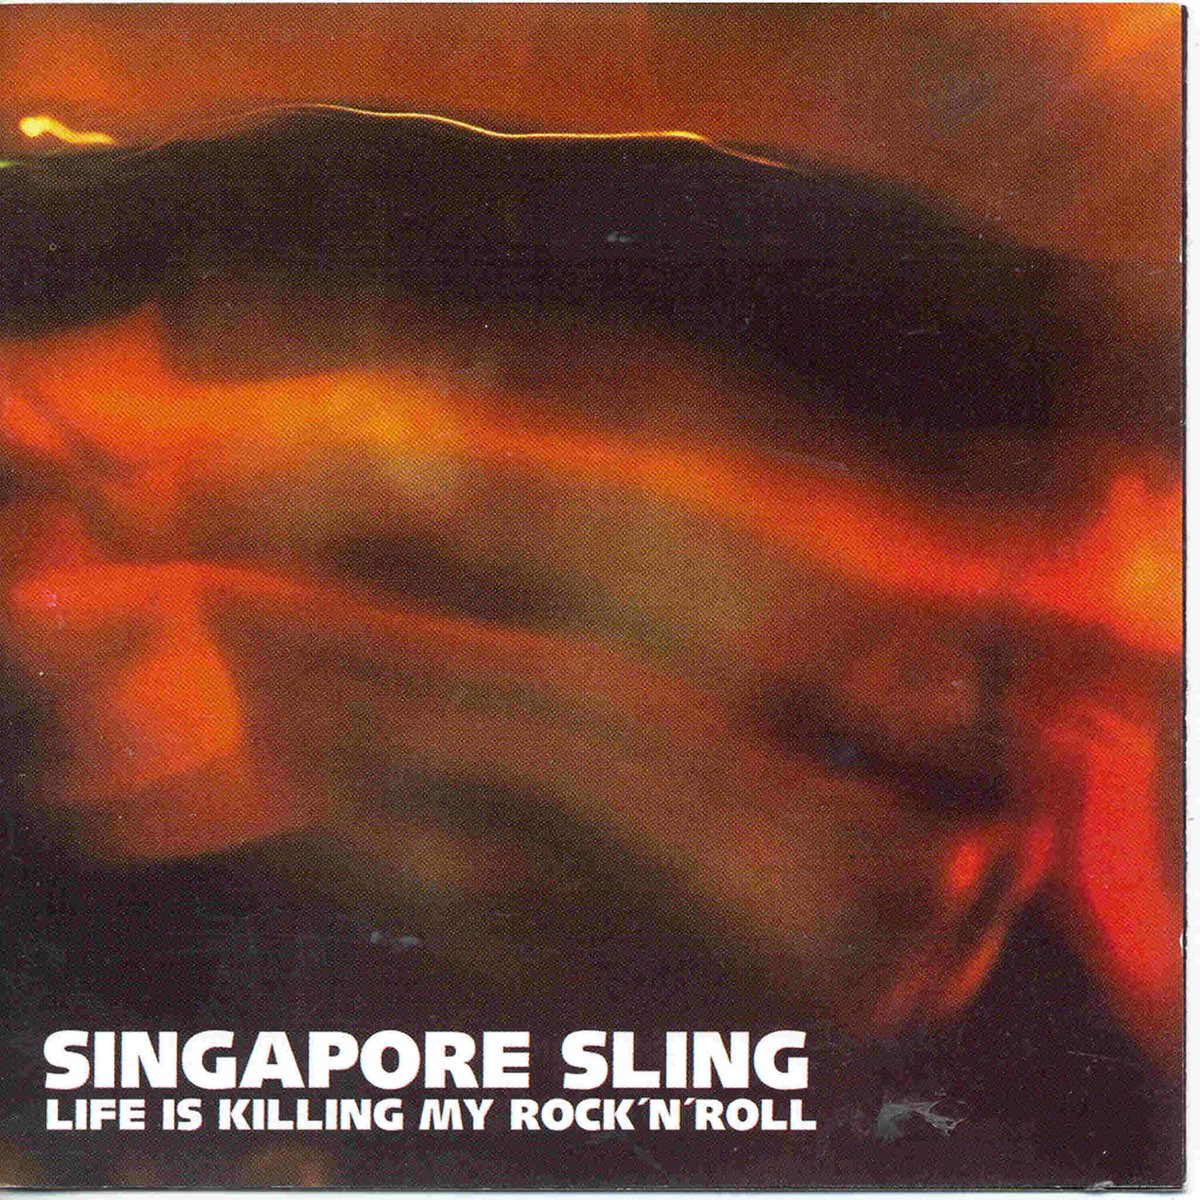 Lee Rock & Kill sick. The Curse of Singapore Sling. My Life is Sling.